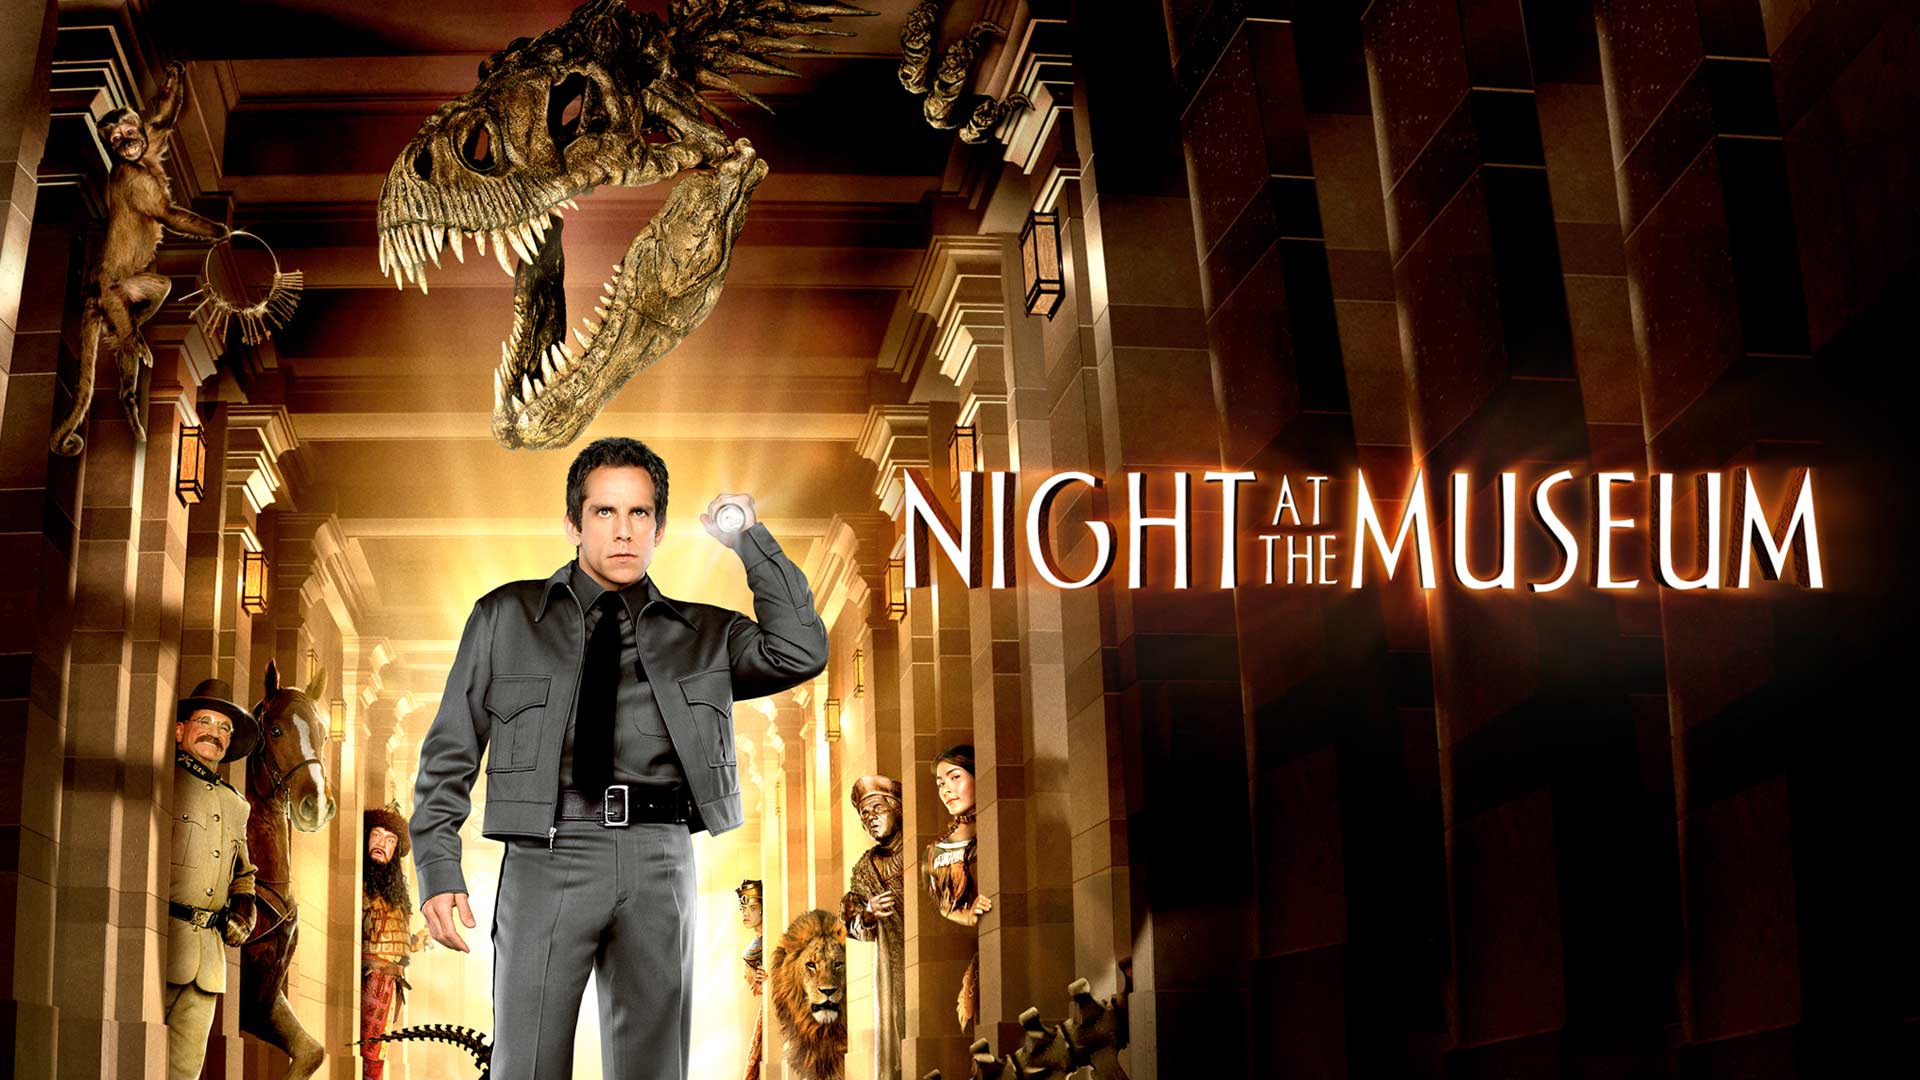 Night At The Museum